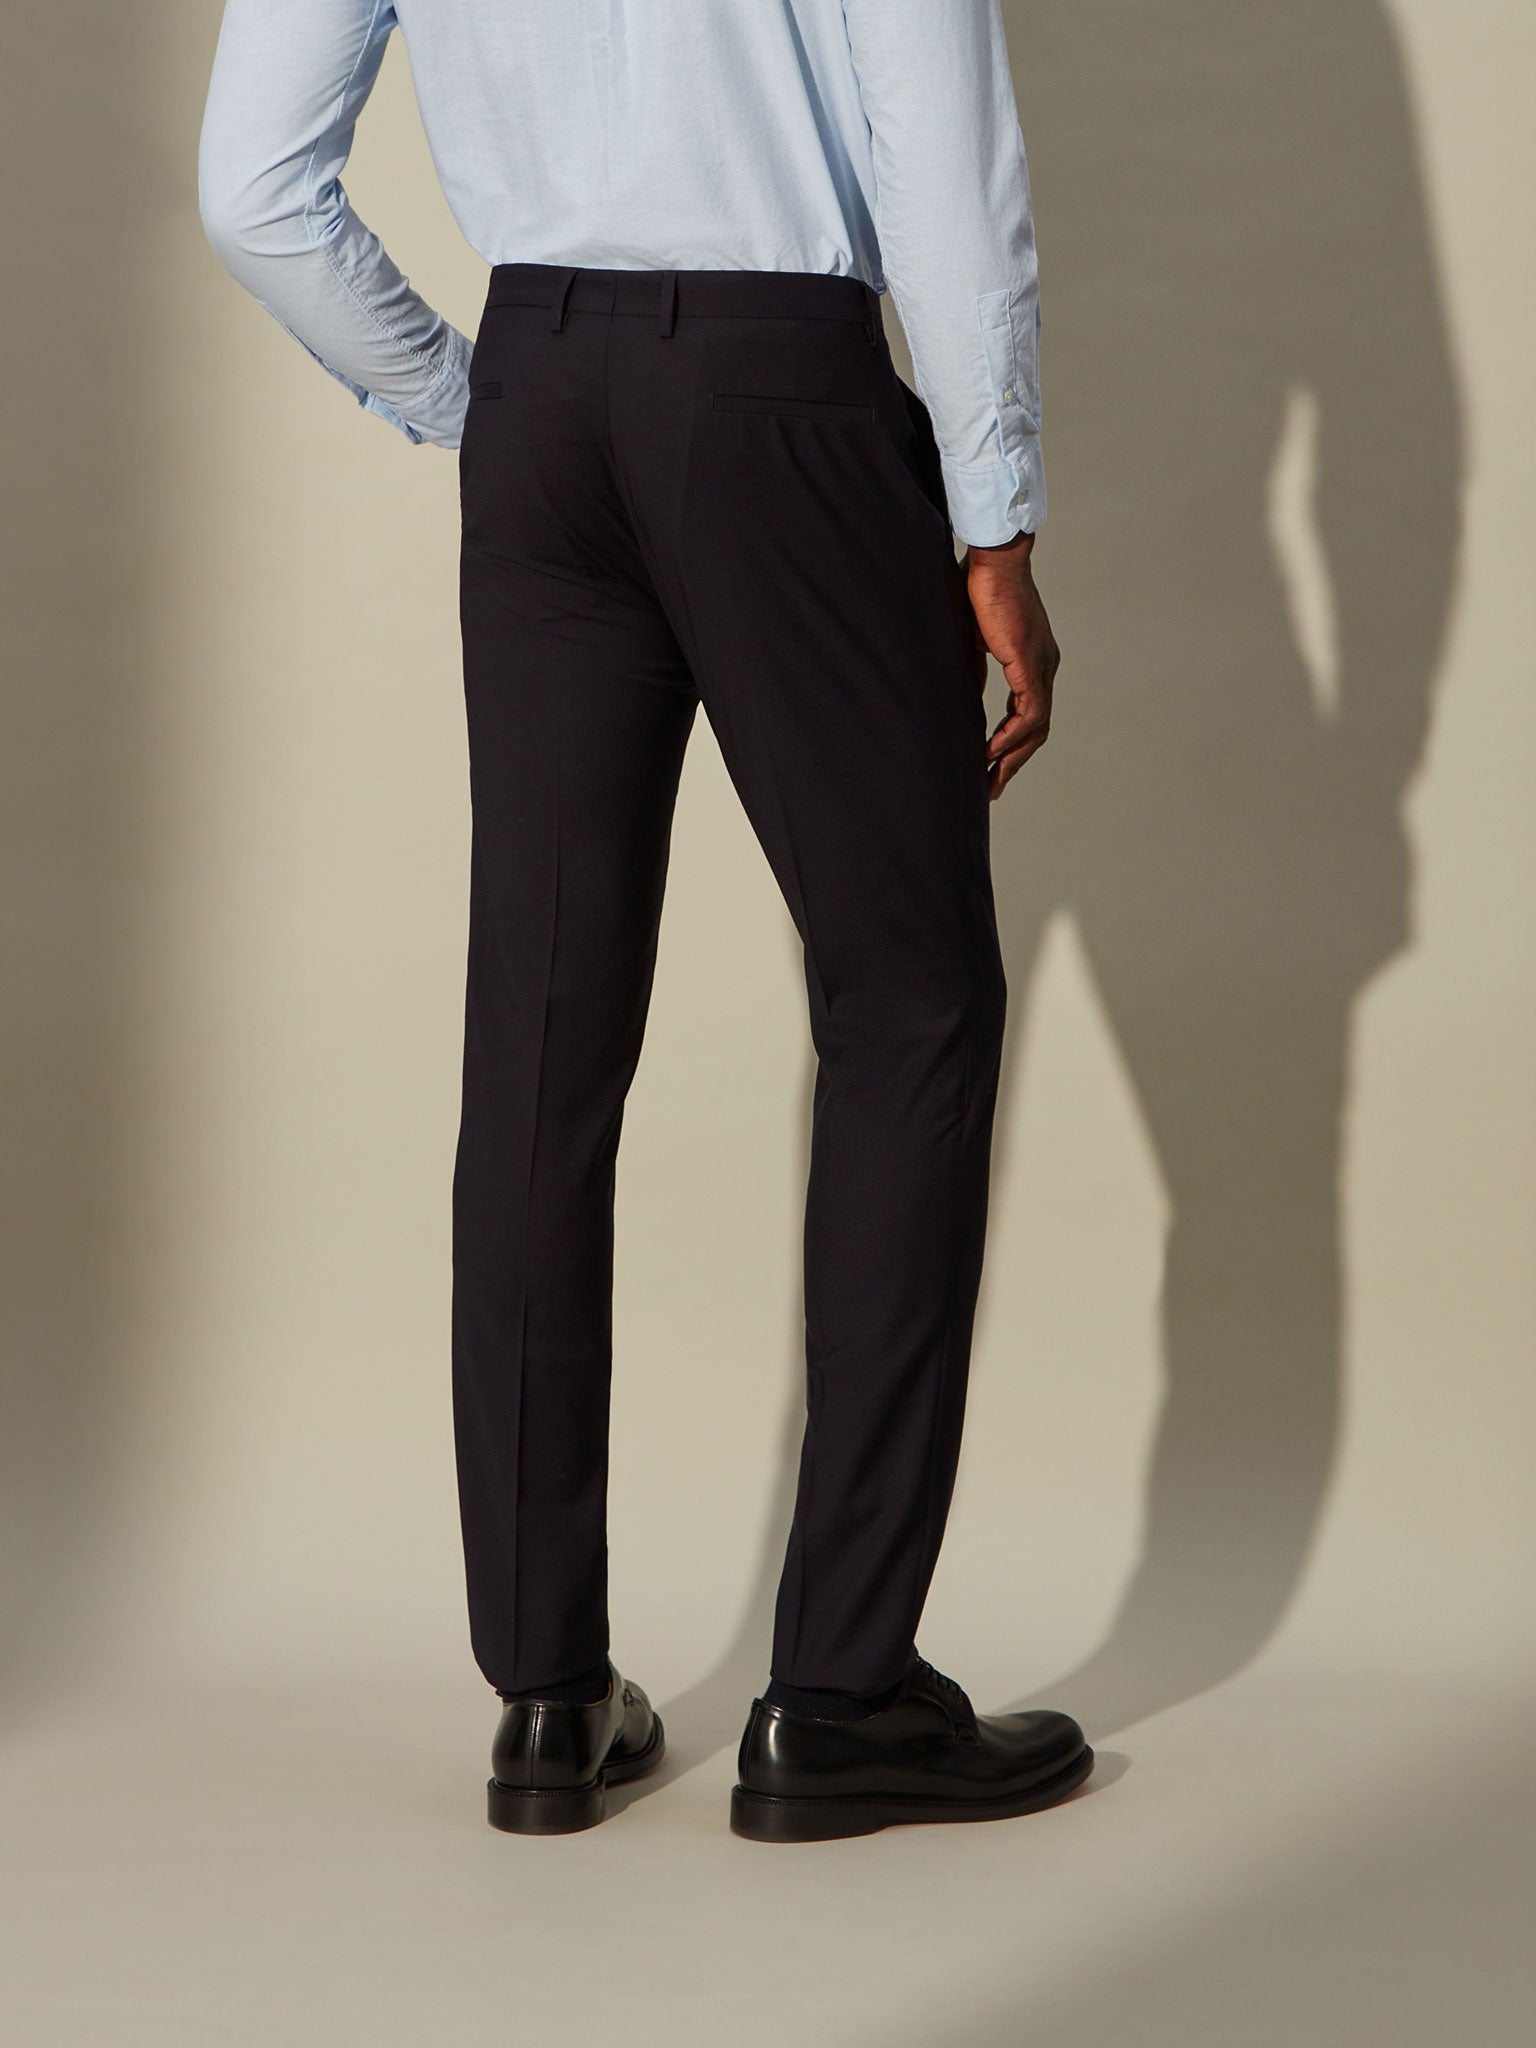 blue wool trousers. From the office to your flight to the lobby lounge.